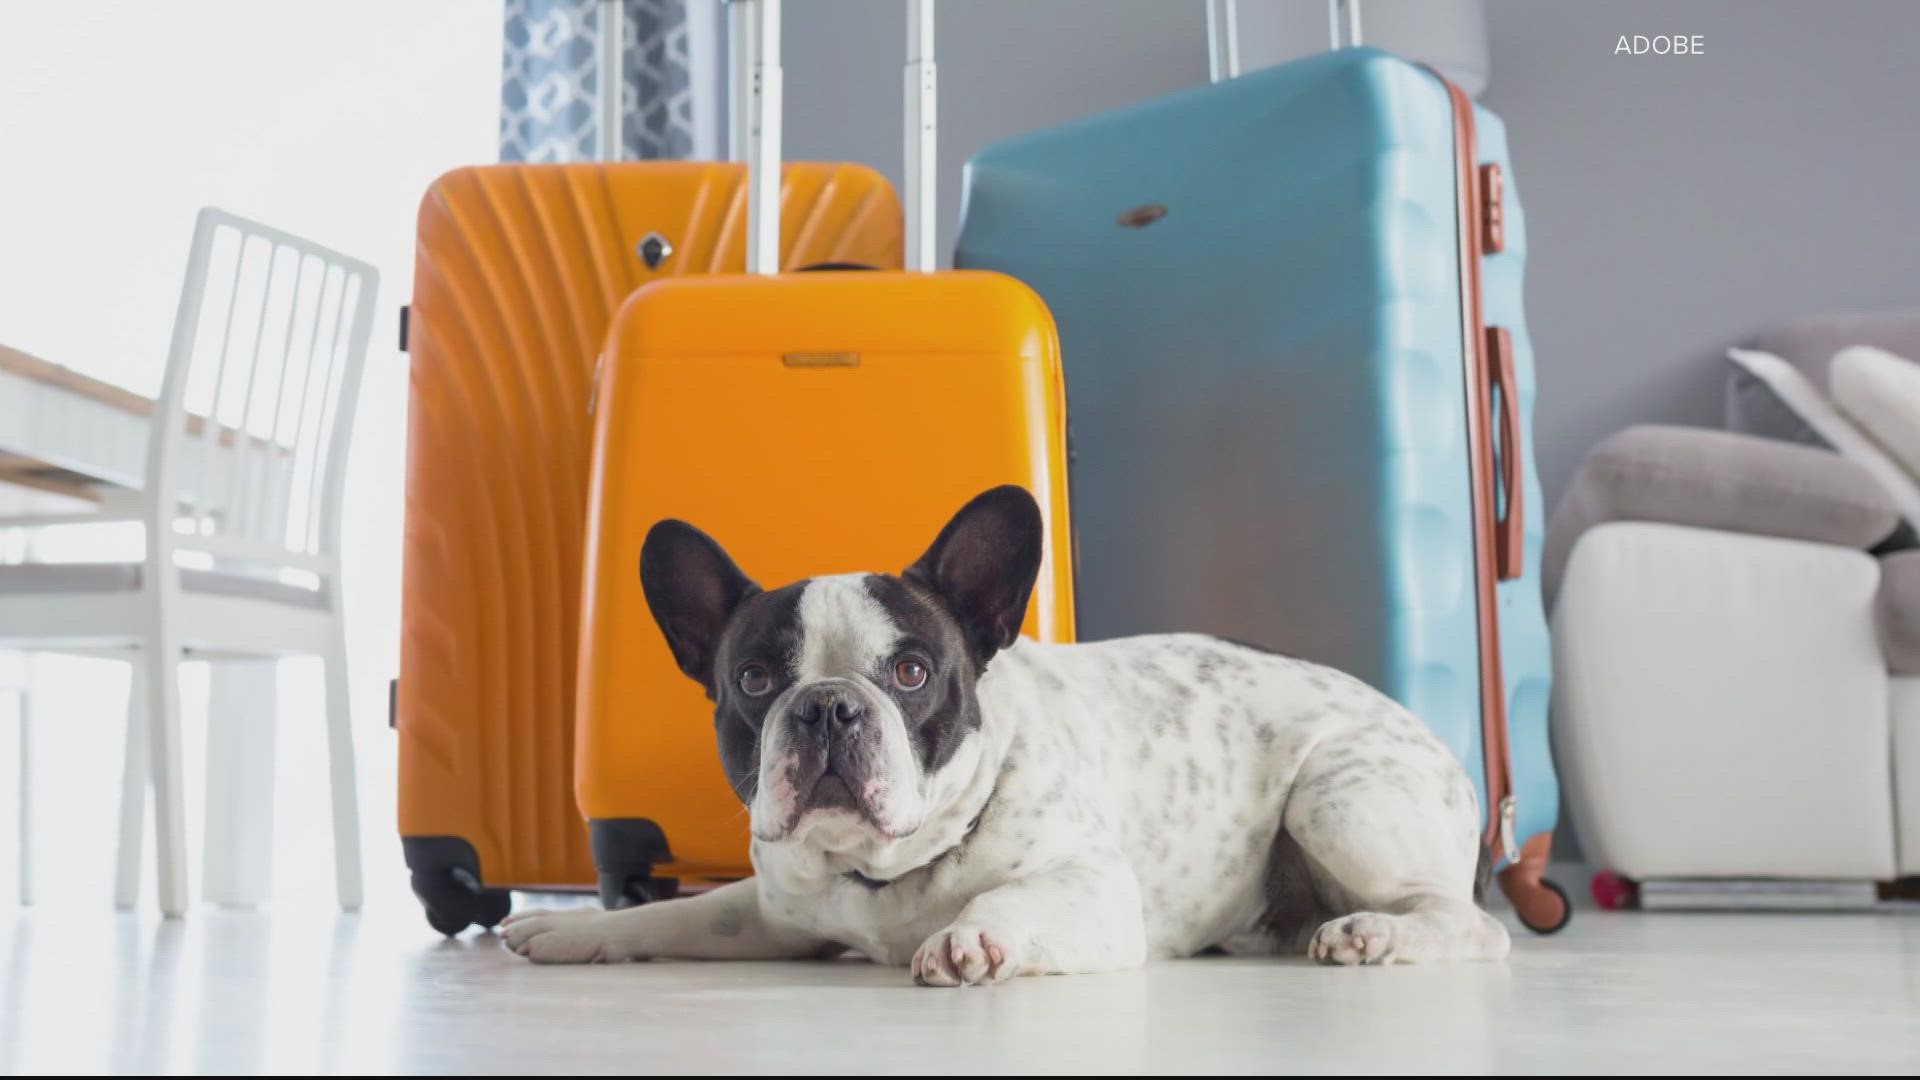 Airlines don't have to accommodate emotional support animals 